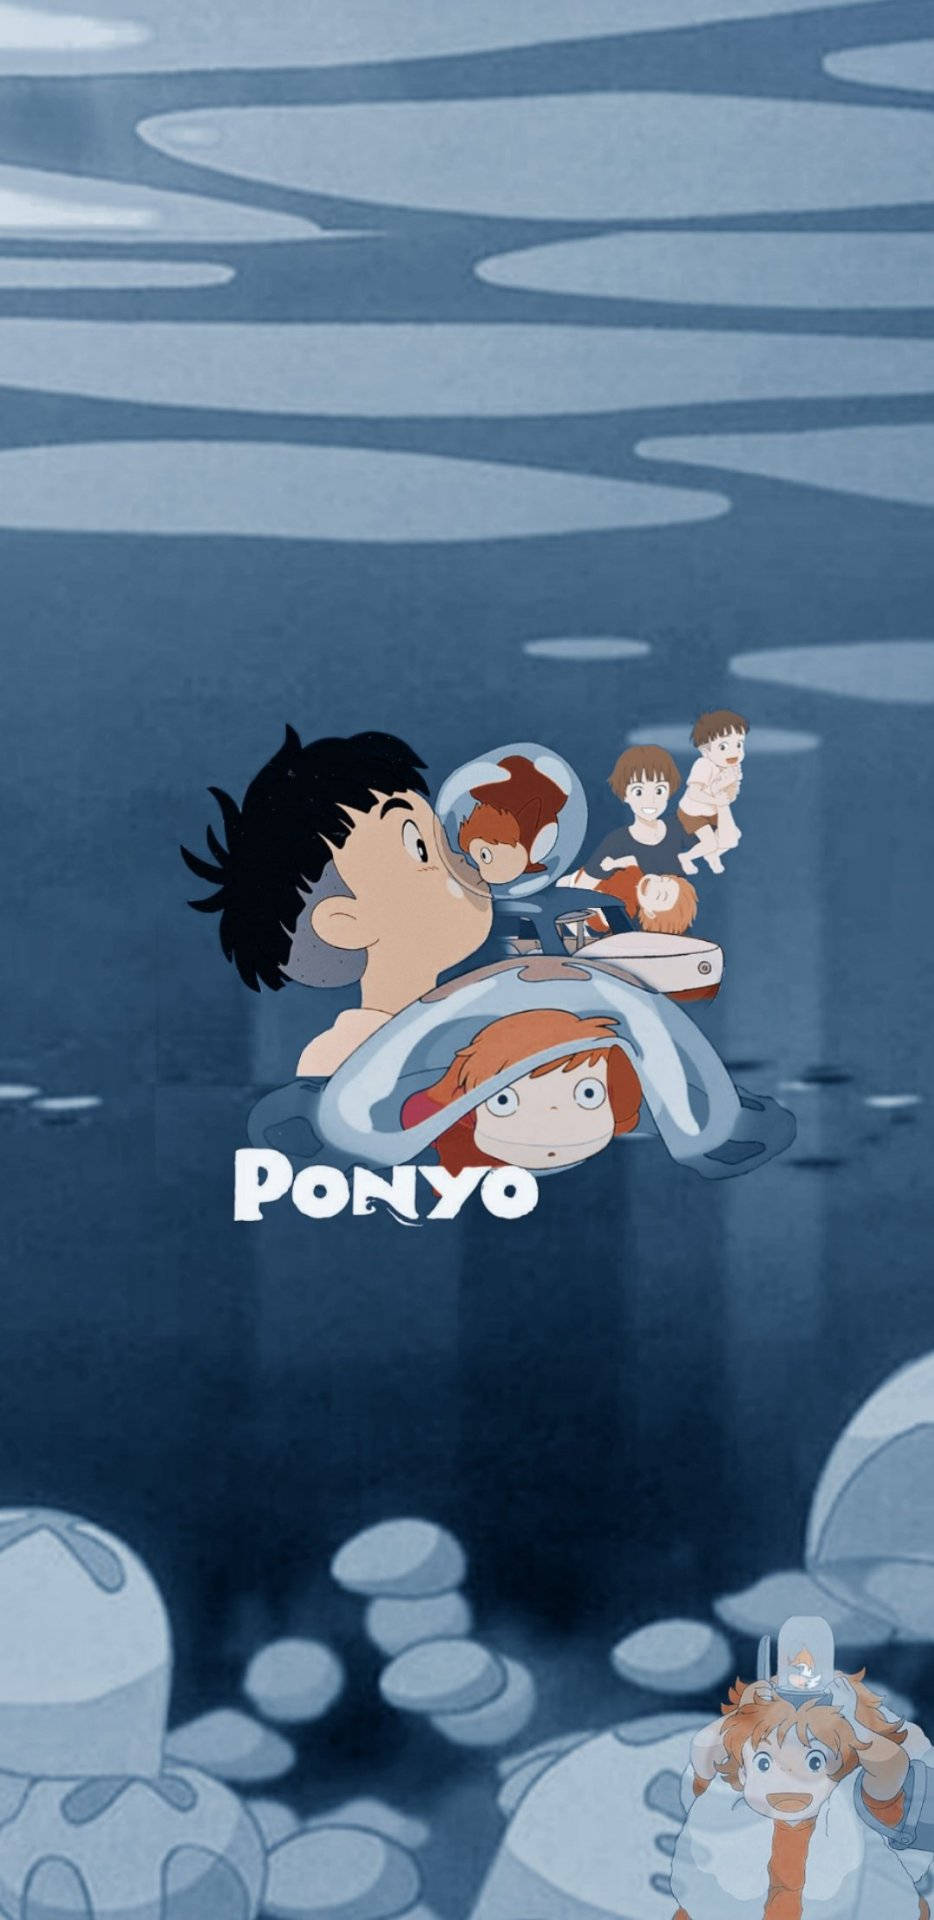 A Mystic Night with Ponyo Wallpaper